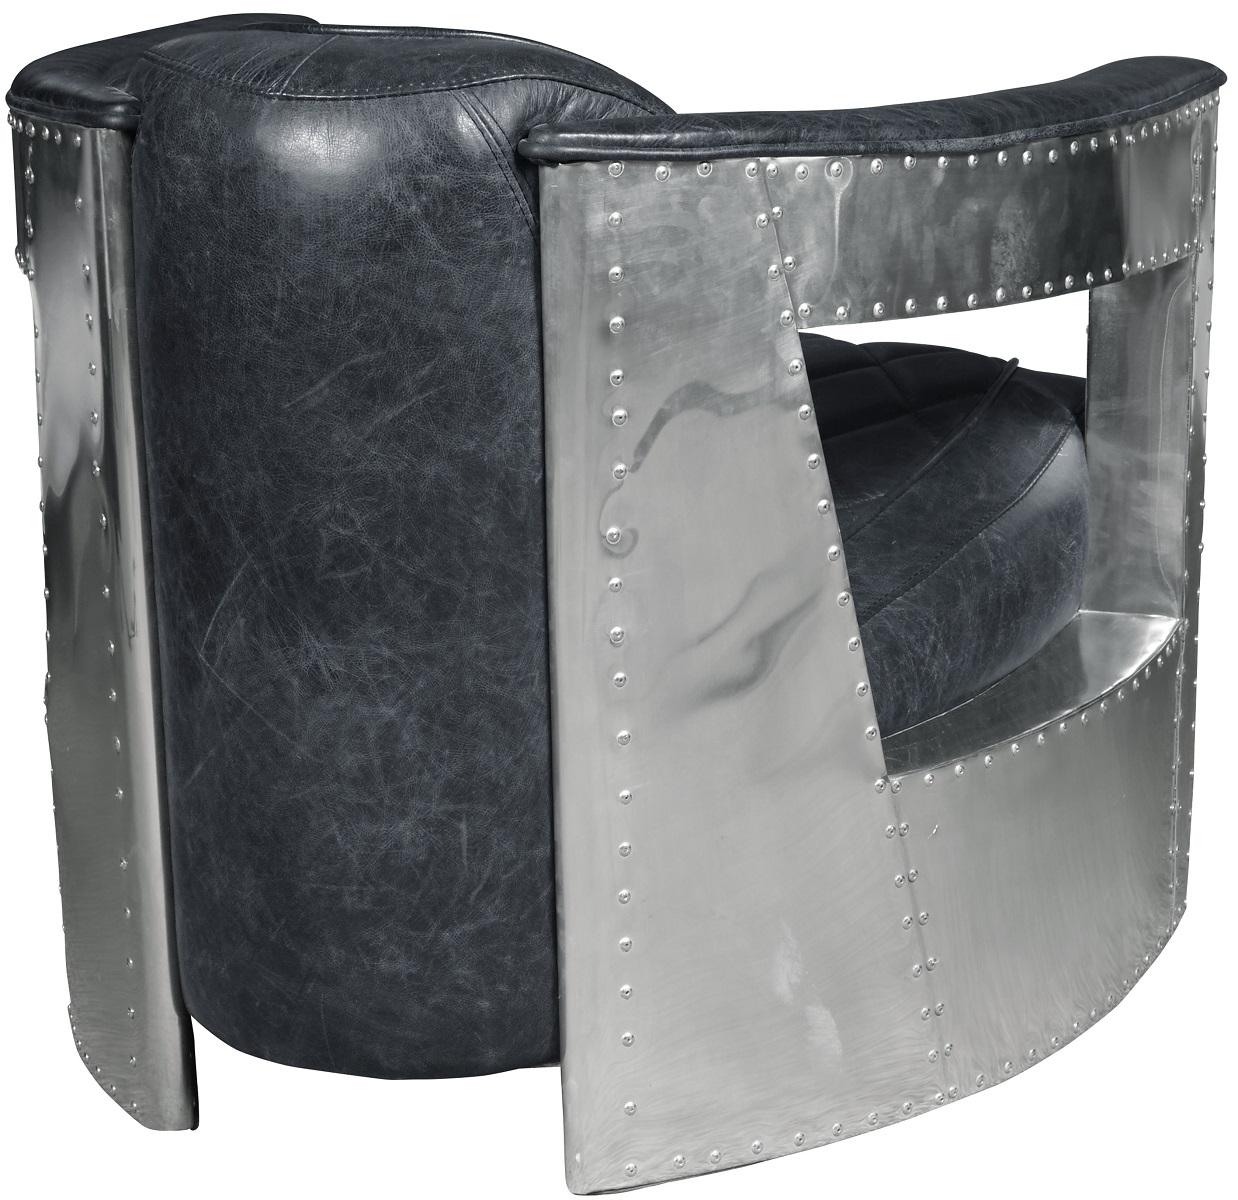 Pulaski Riveted Leather Aviation Arm Chair in Charcoal Black